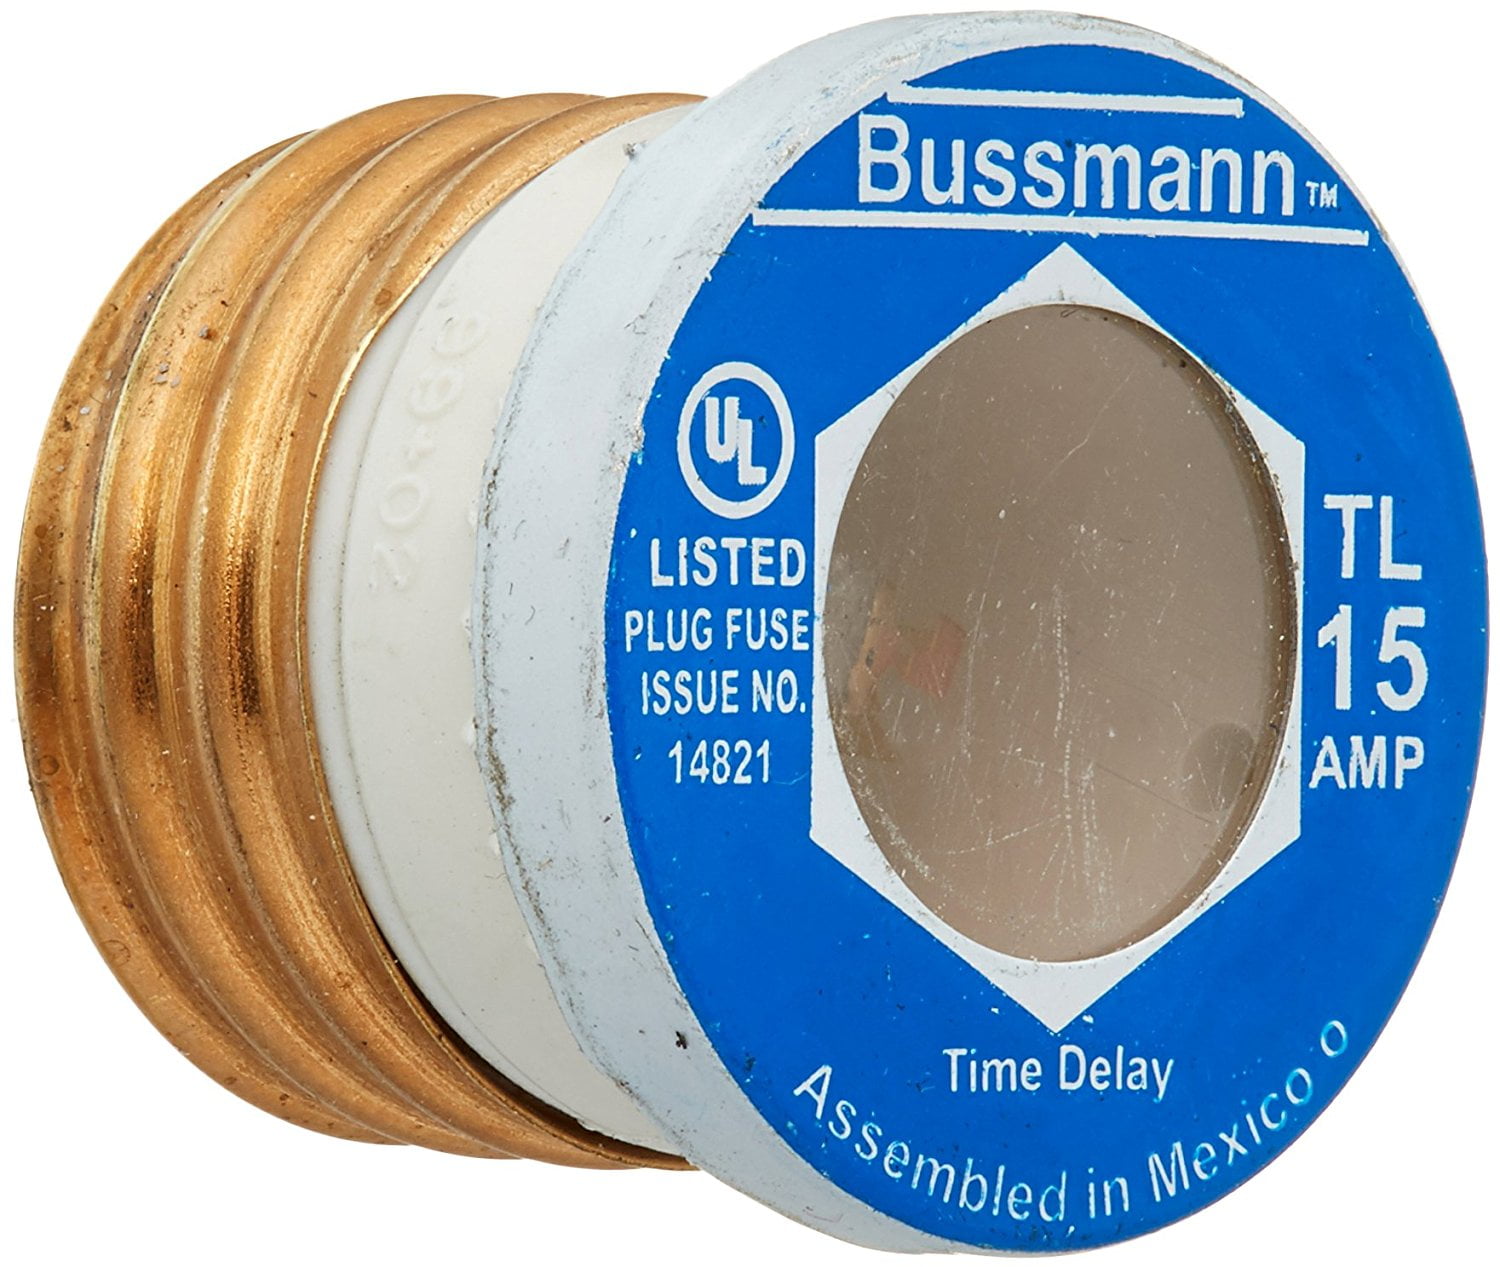 Bussmann BP//T-20 20 Amp Type T Time-Delay Dual-Element Edison Base Plug Fuse 2-Pack 125V Ul Listed Carded